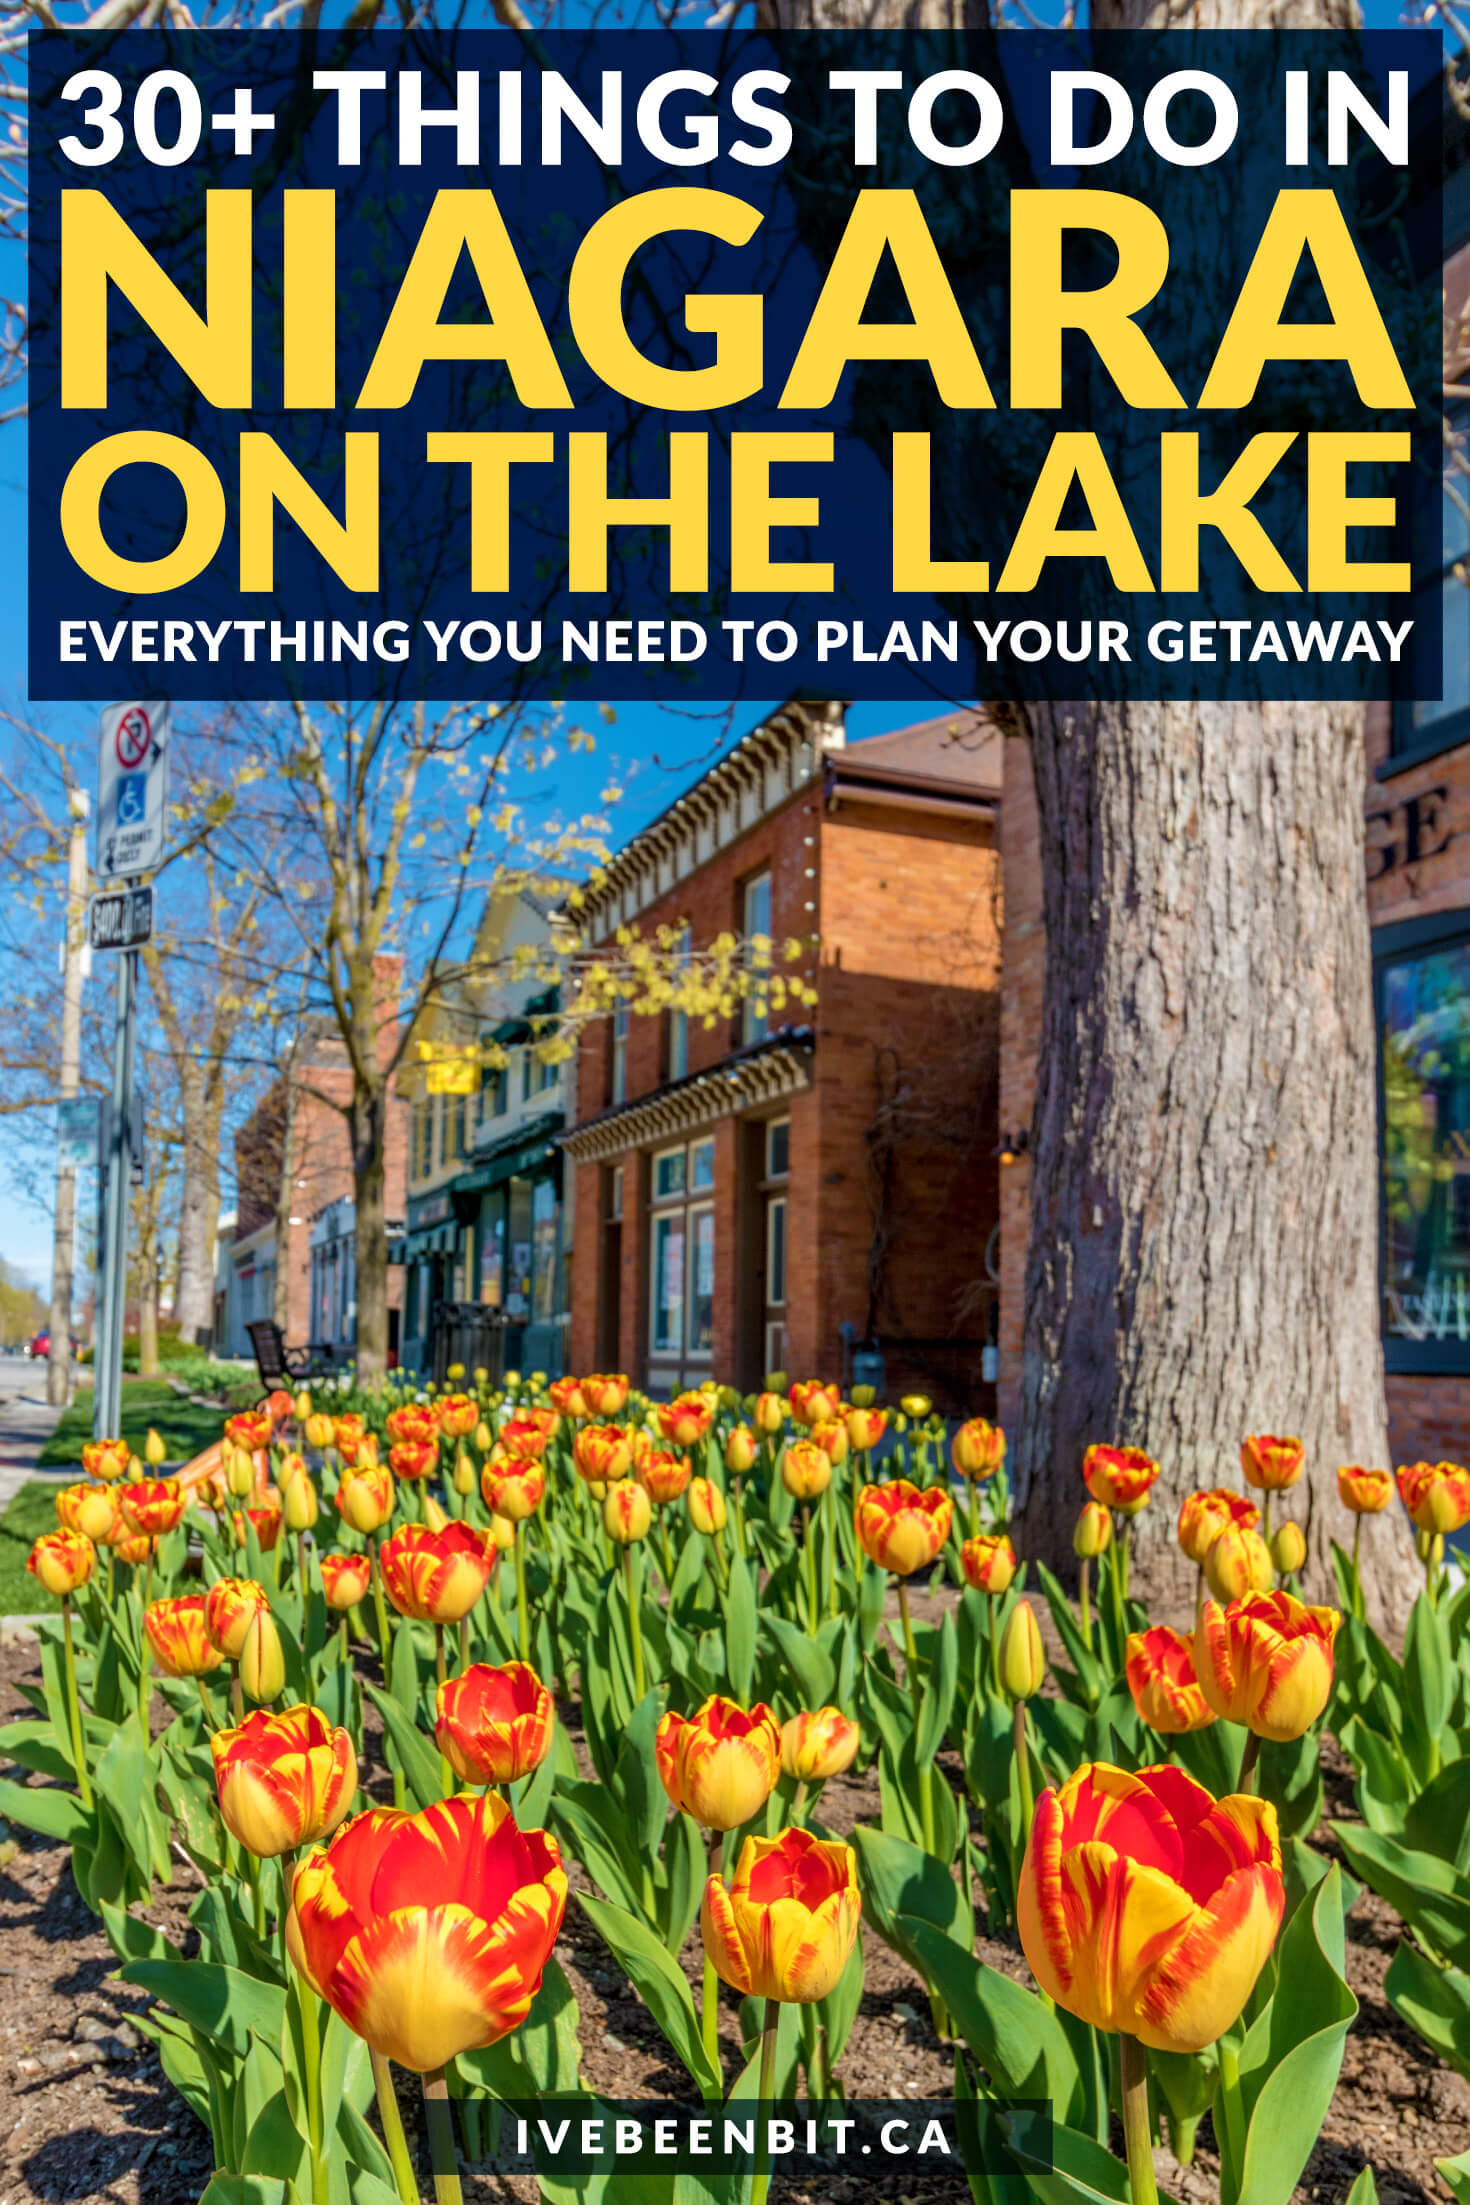 30+ Charming Things to Do in NiagaraontheLake From a Local » I've